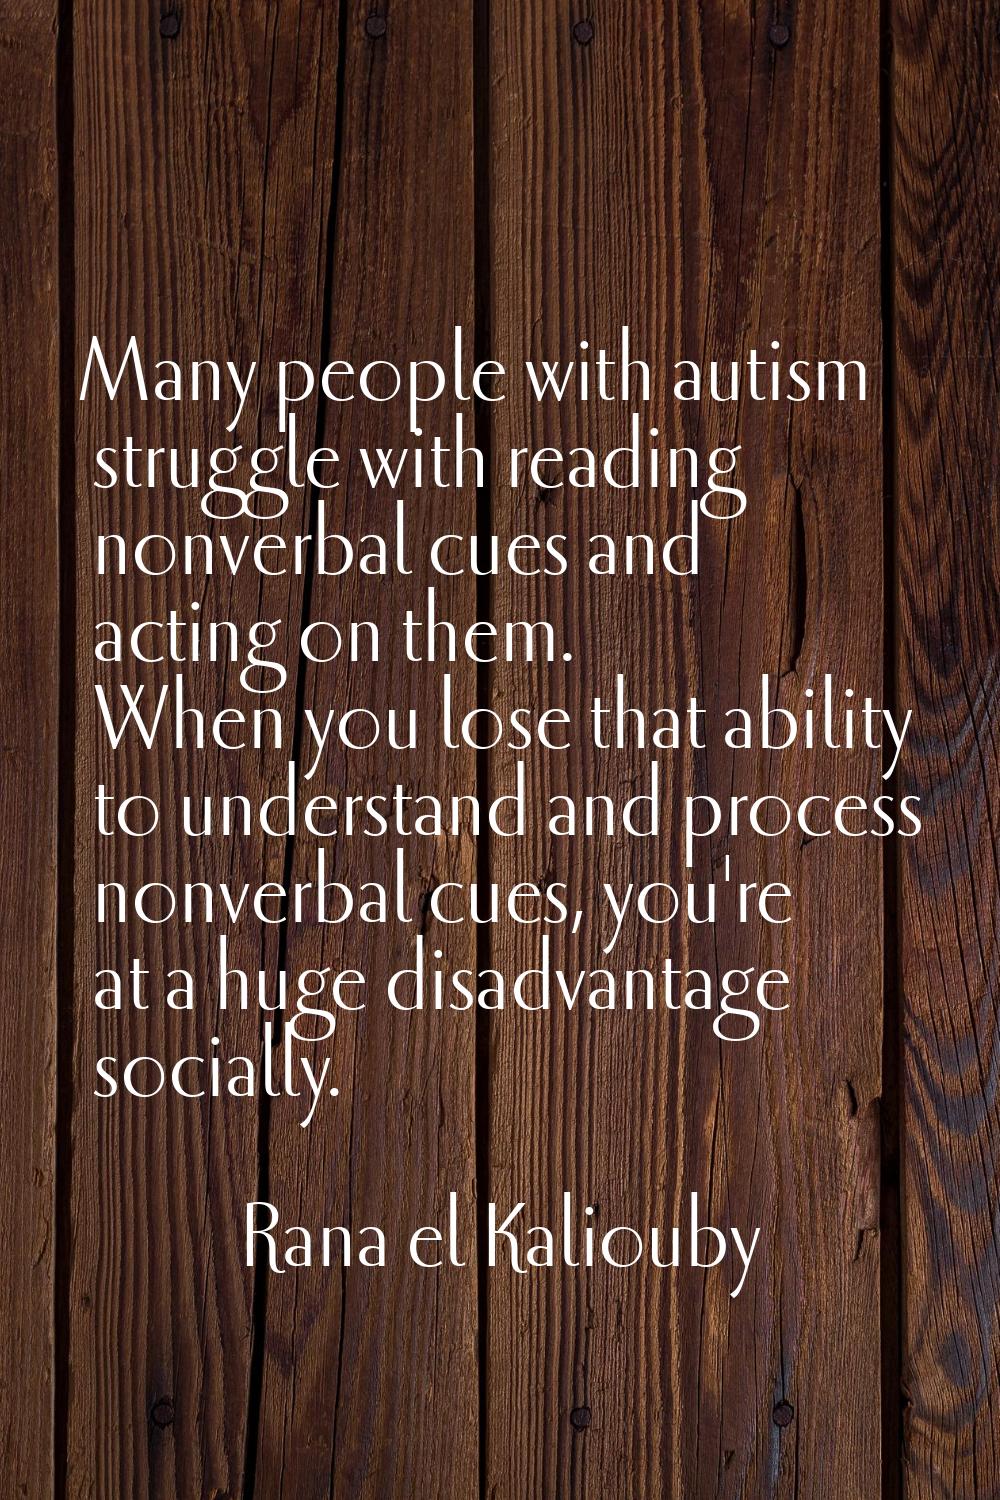 Many people with autism struggle with reading nonverbal cues and acting on them. When you lose that